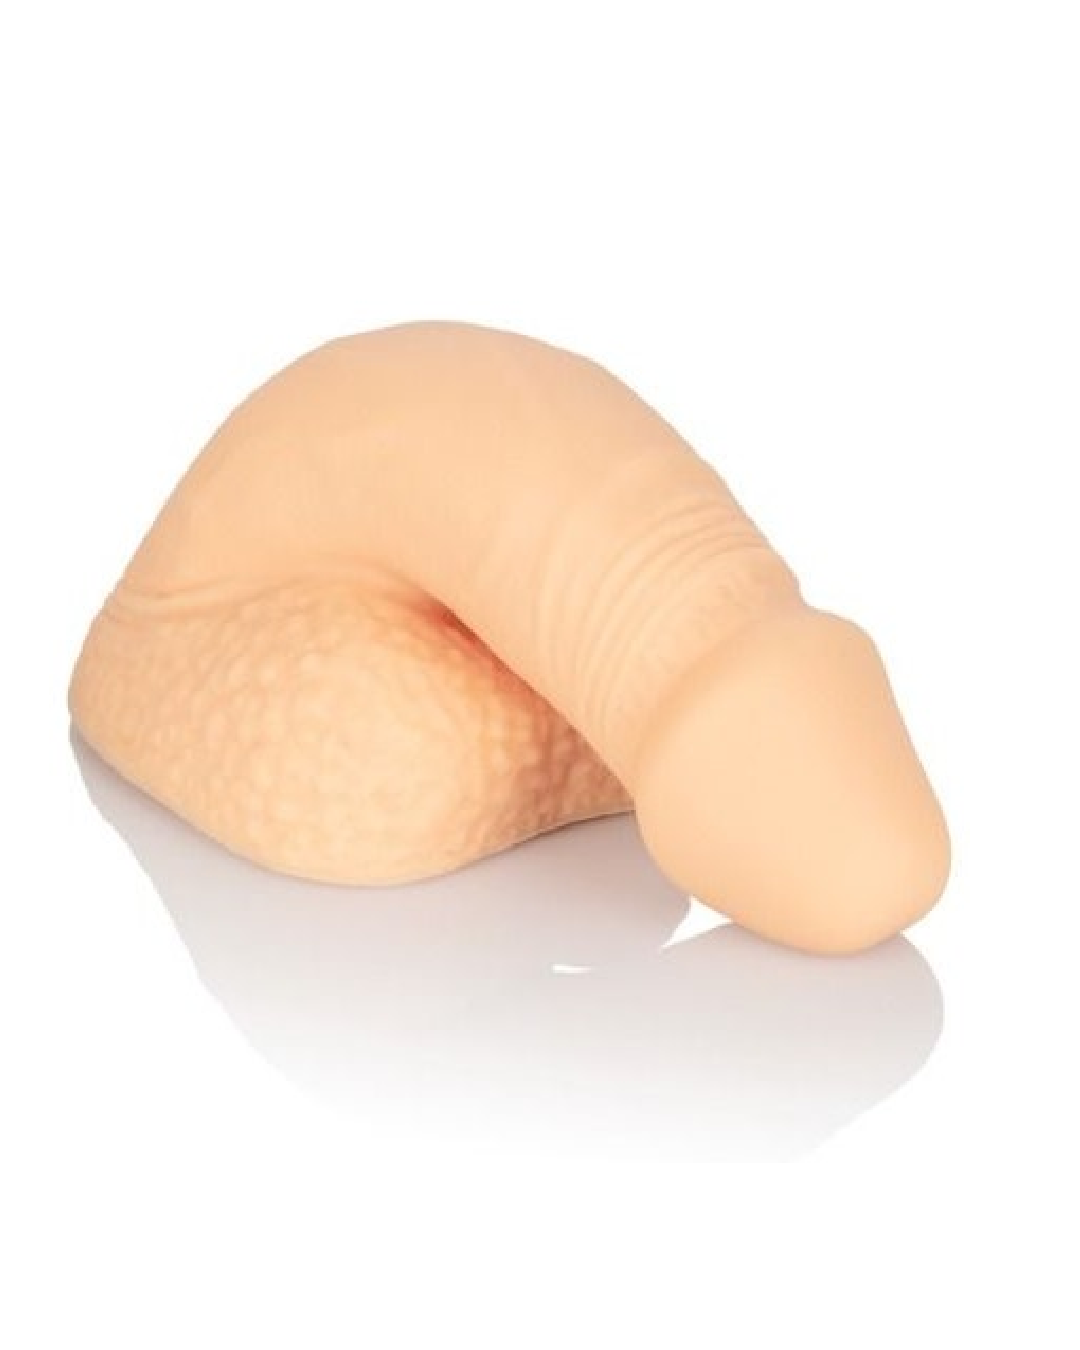 Packer Gear Silicone Packing Penis 5 Inch - Vanilla